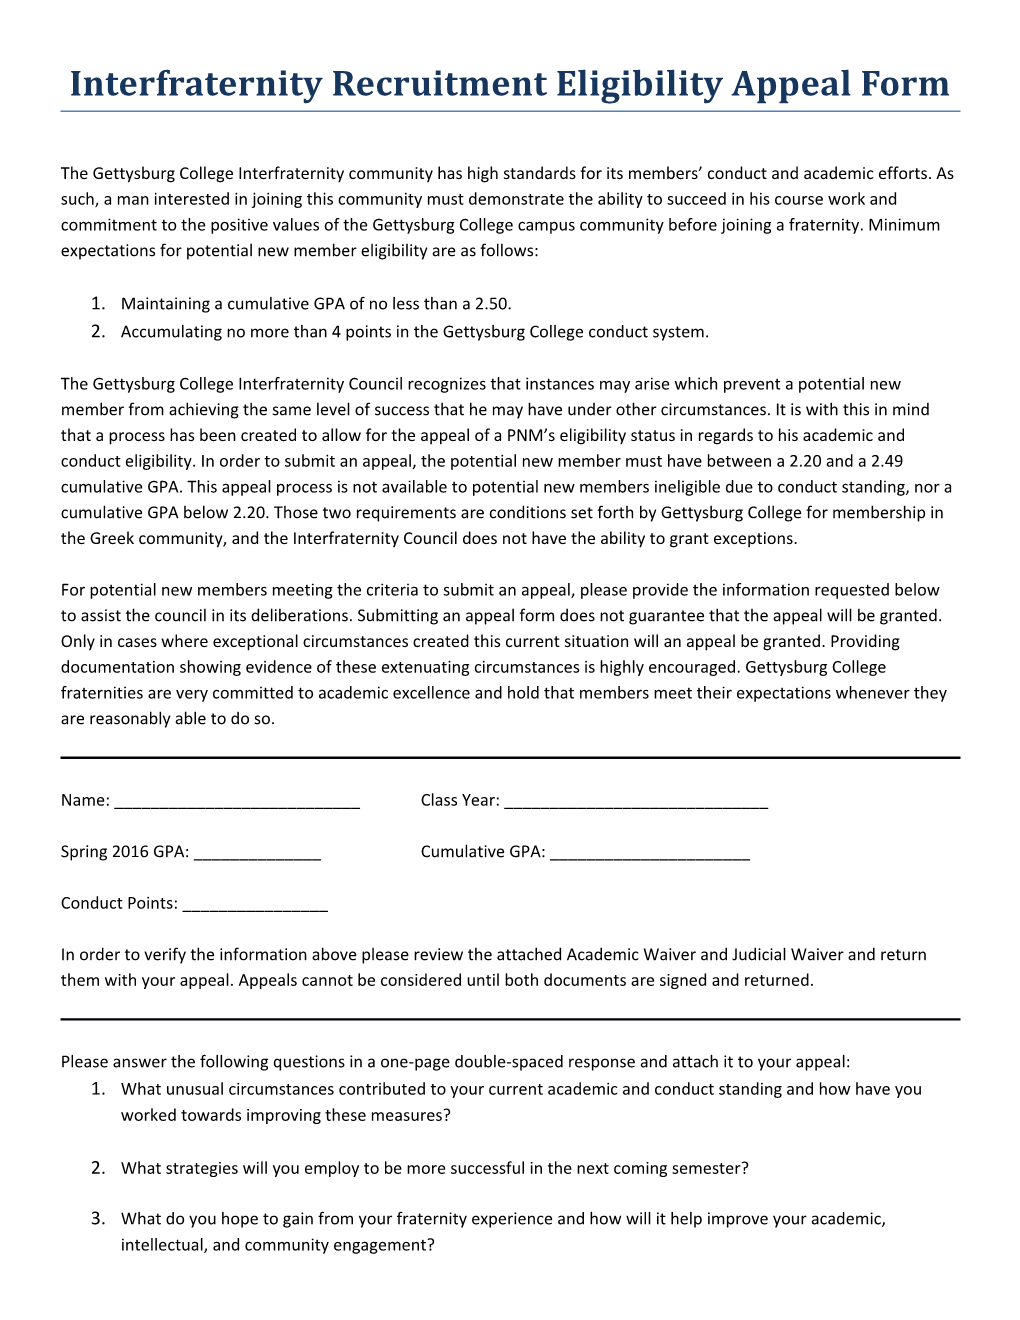 Interfraternity Recruitment Eligibility Appeal Form